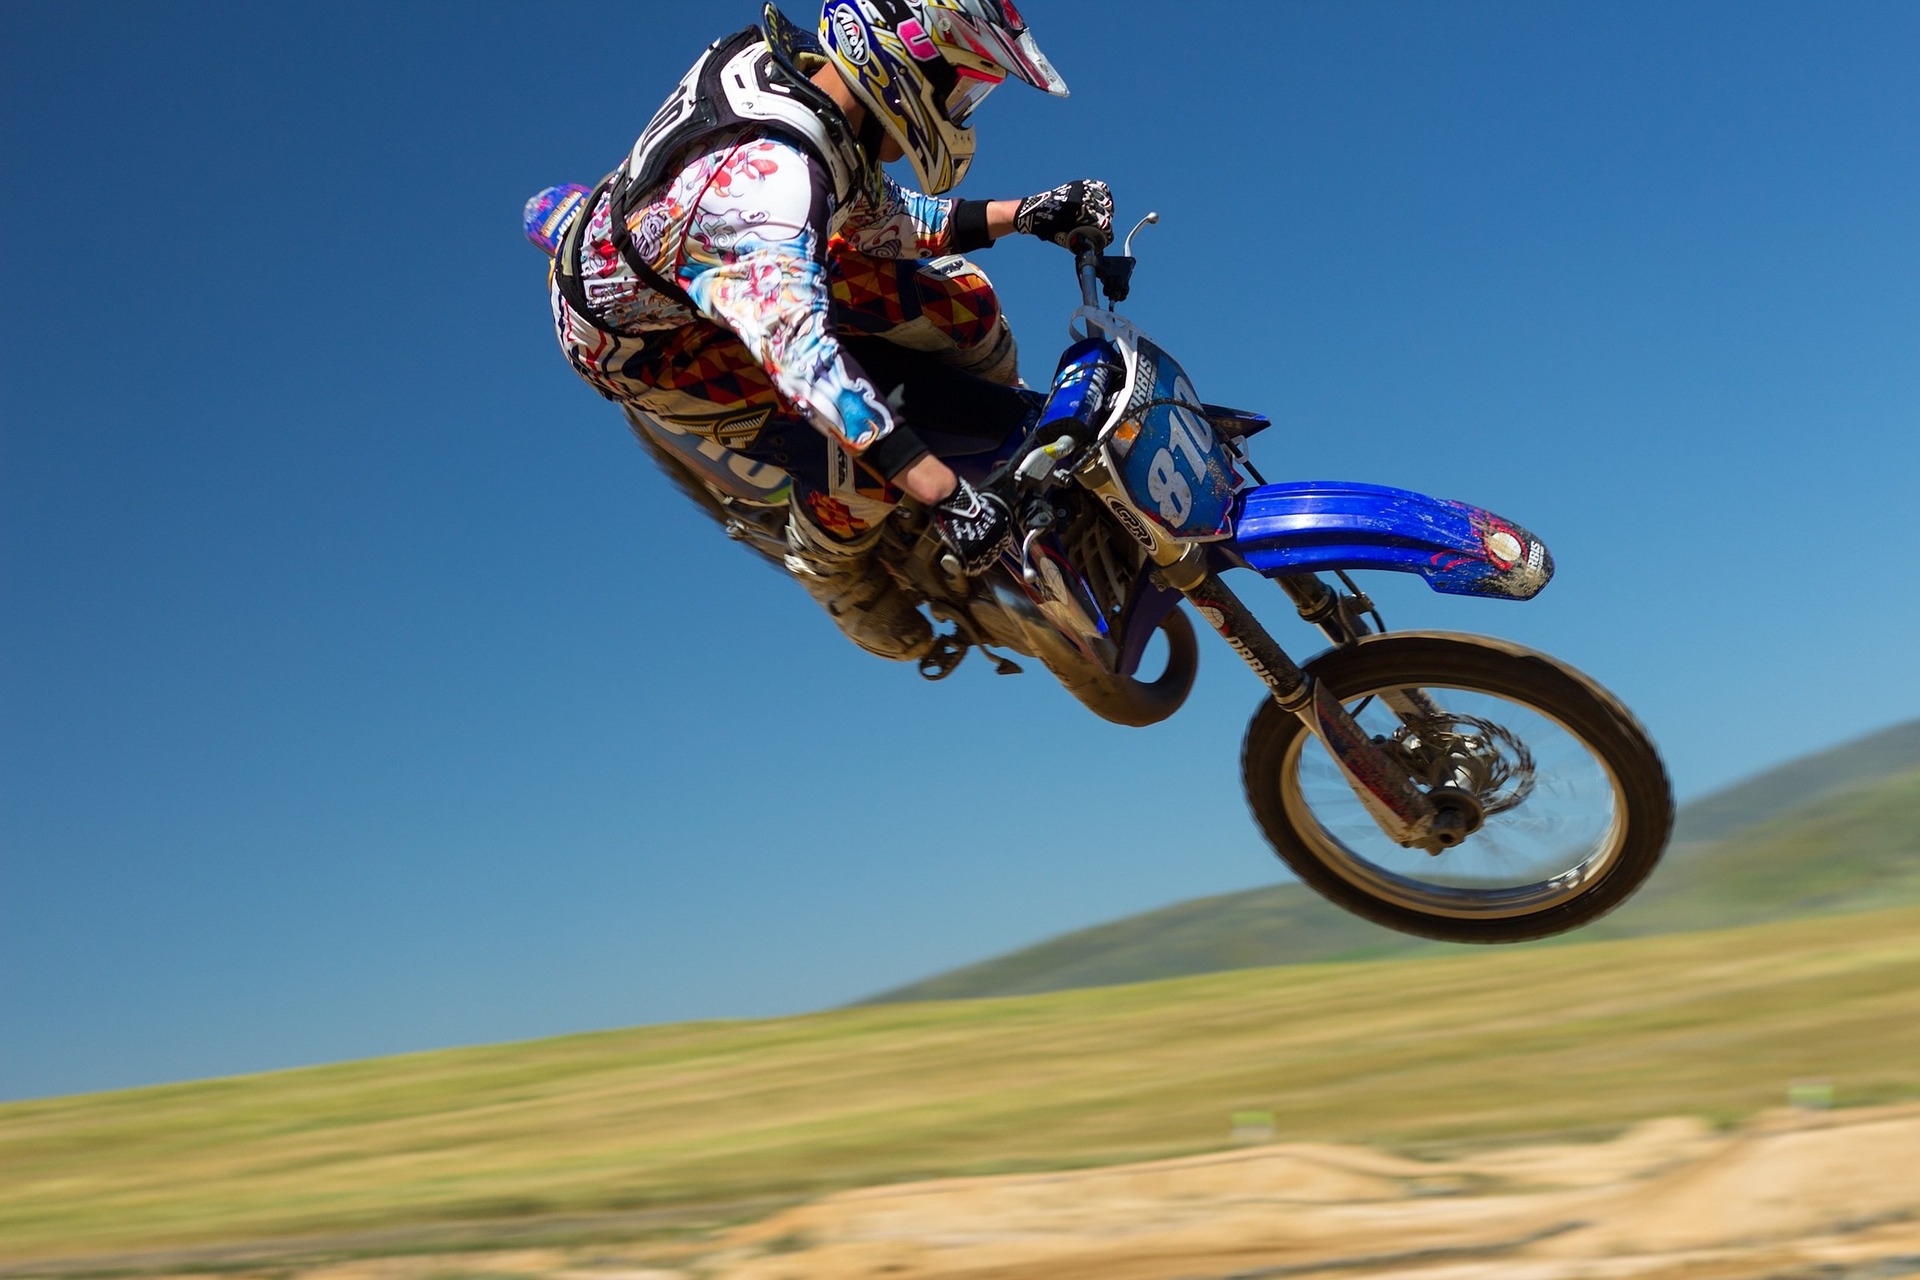 Dirt Bike Racer is showing some tricks in the air